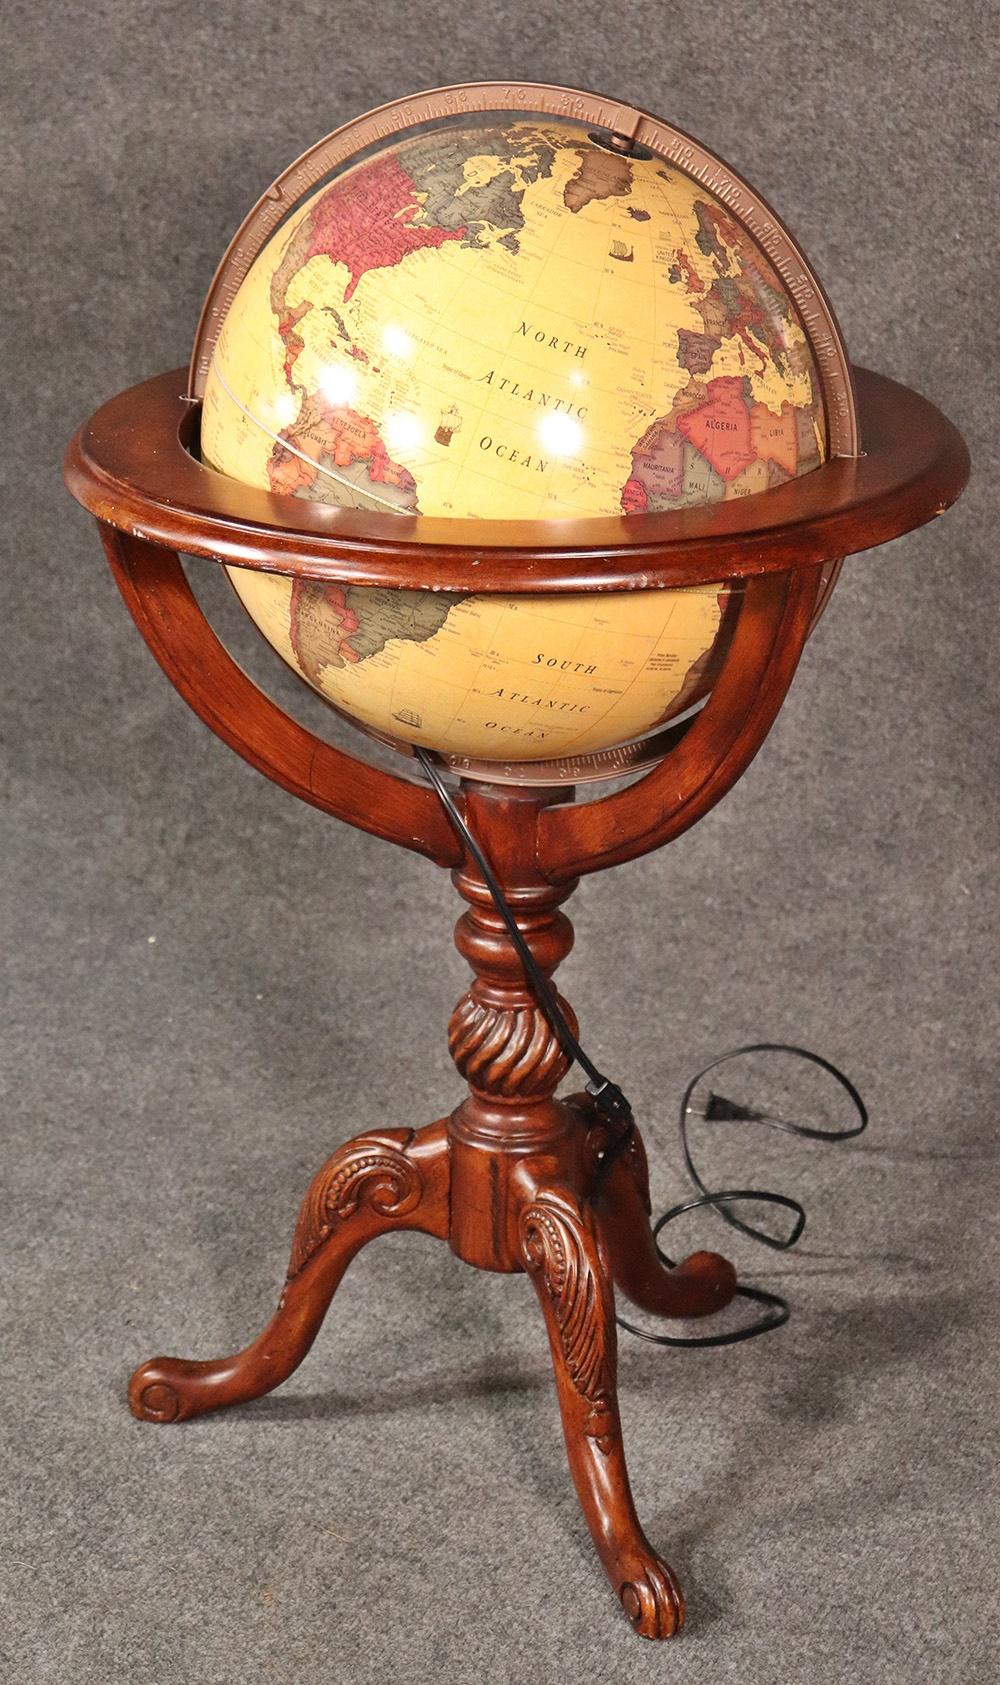 Vintage Glassica lighted French style world globe on a walnut base by George F. Cram.